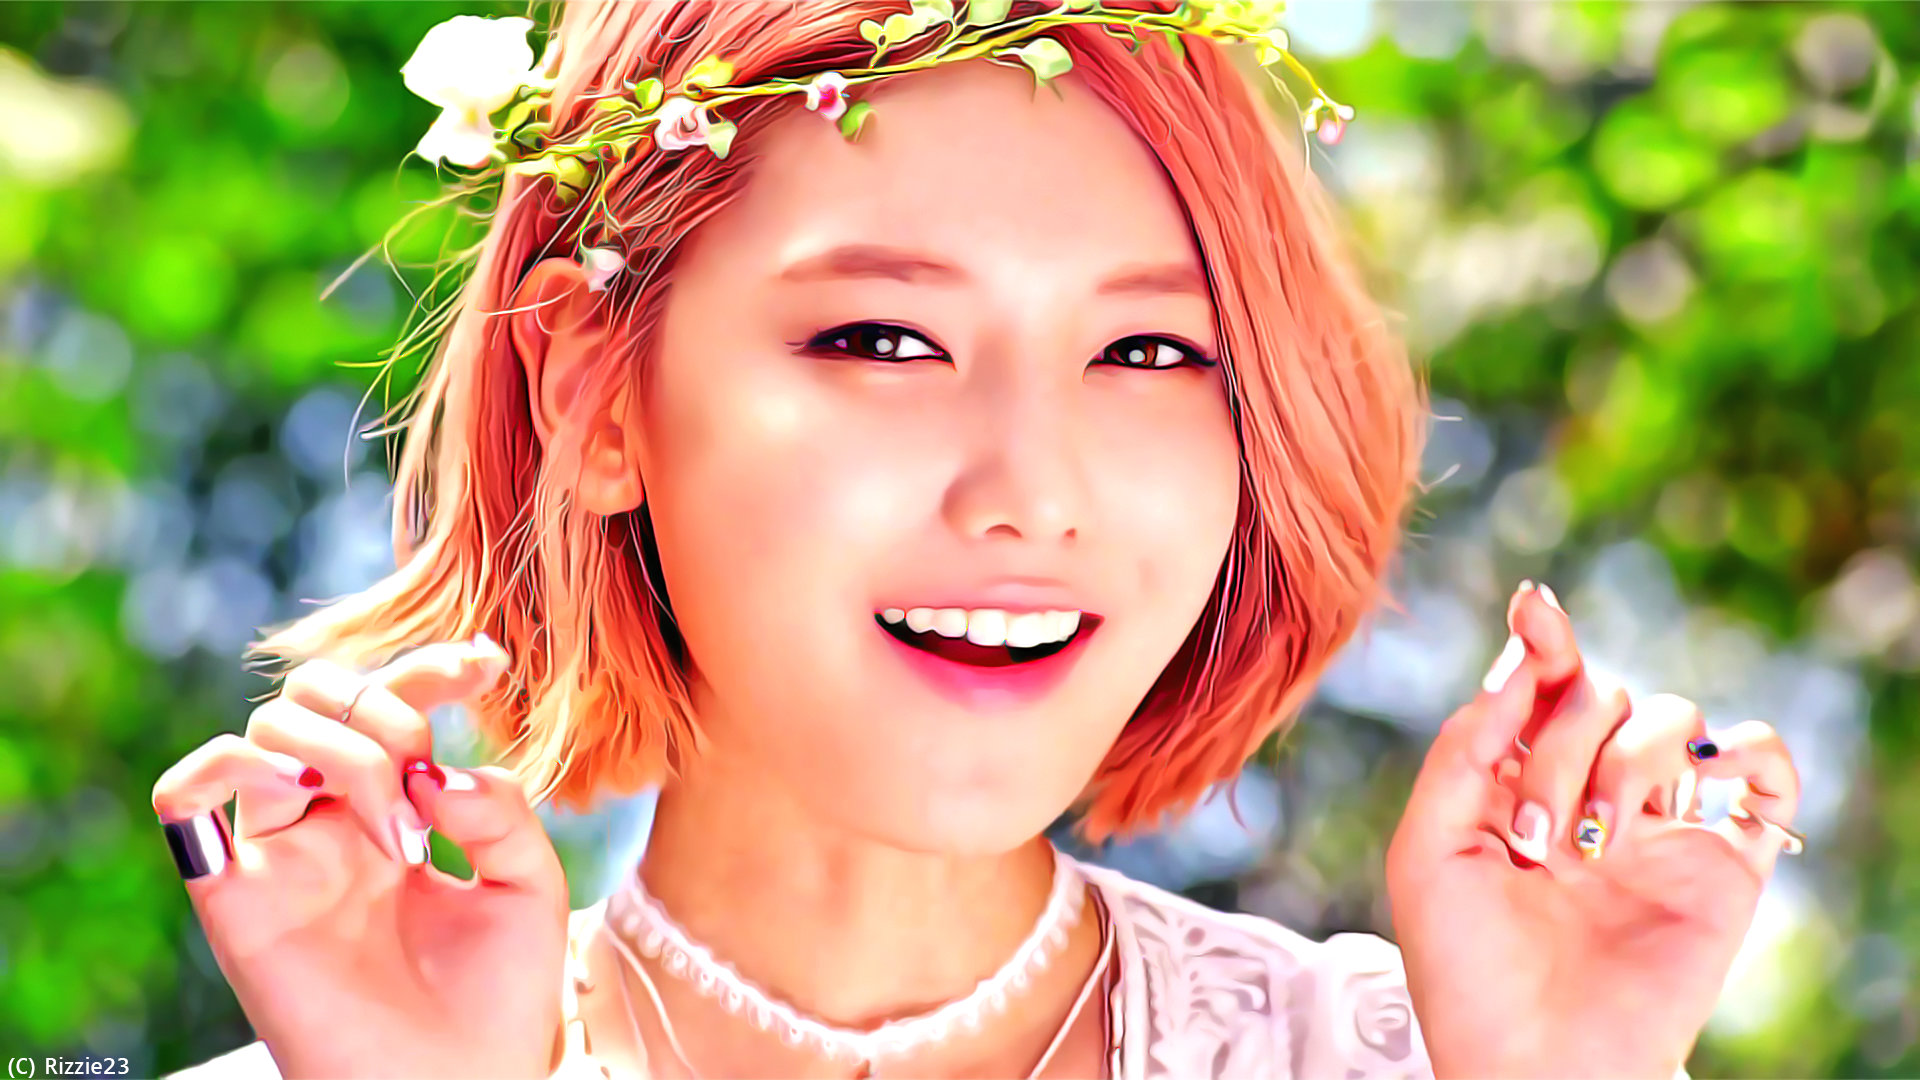 Sooyoung Party Wallpaper By Rizzie23 Watch Customization